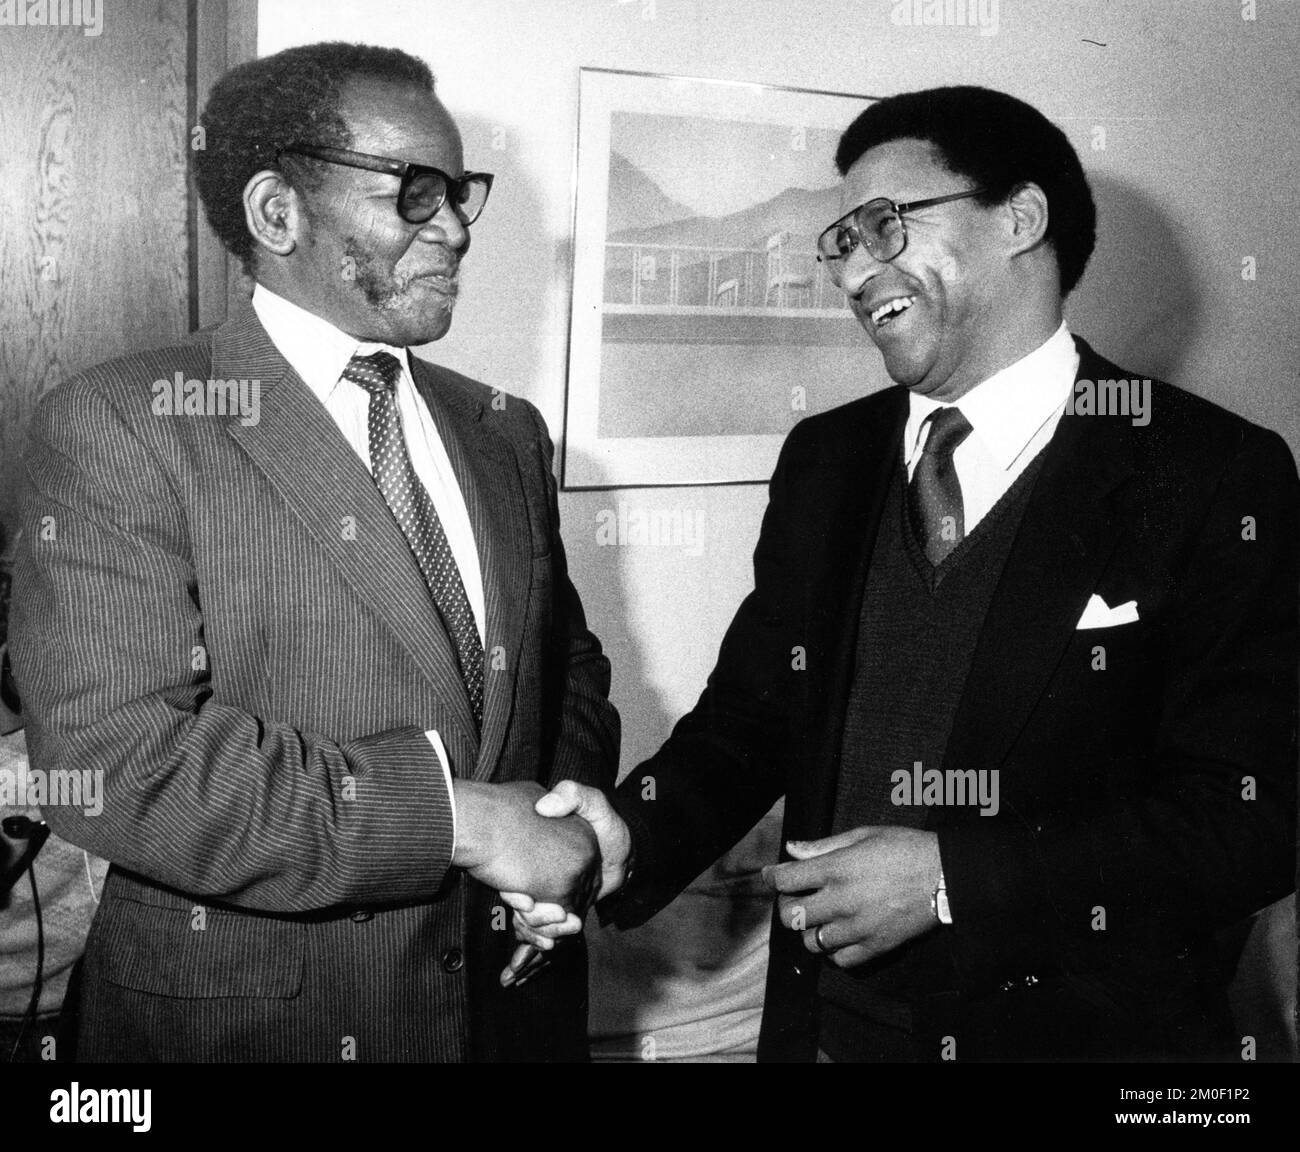 ANC president Oliver Tambo, left, and Rev. Alan Boesak, who had received special permission to leave South Africa, at the funeral of Sweden's Prime Minister Olof Palme in Stockholm, Sweden on March 14, 1986.Photo: Folke Hellberg / DN / TT / Code: 23 Stock Photo